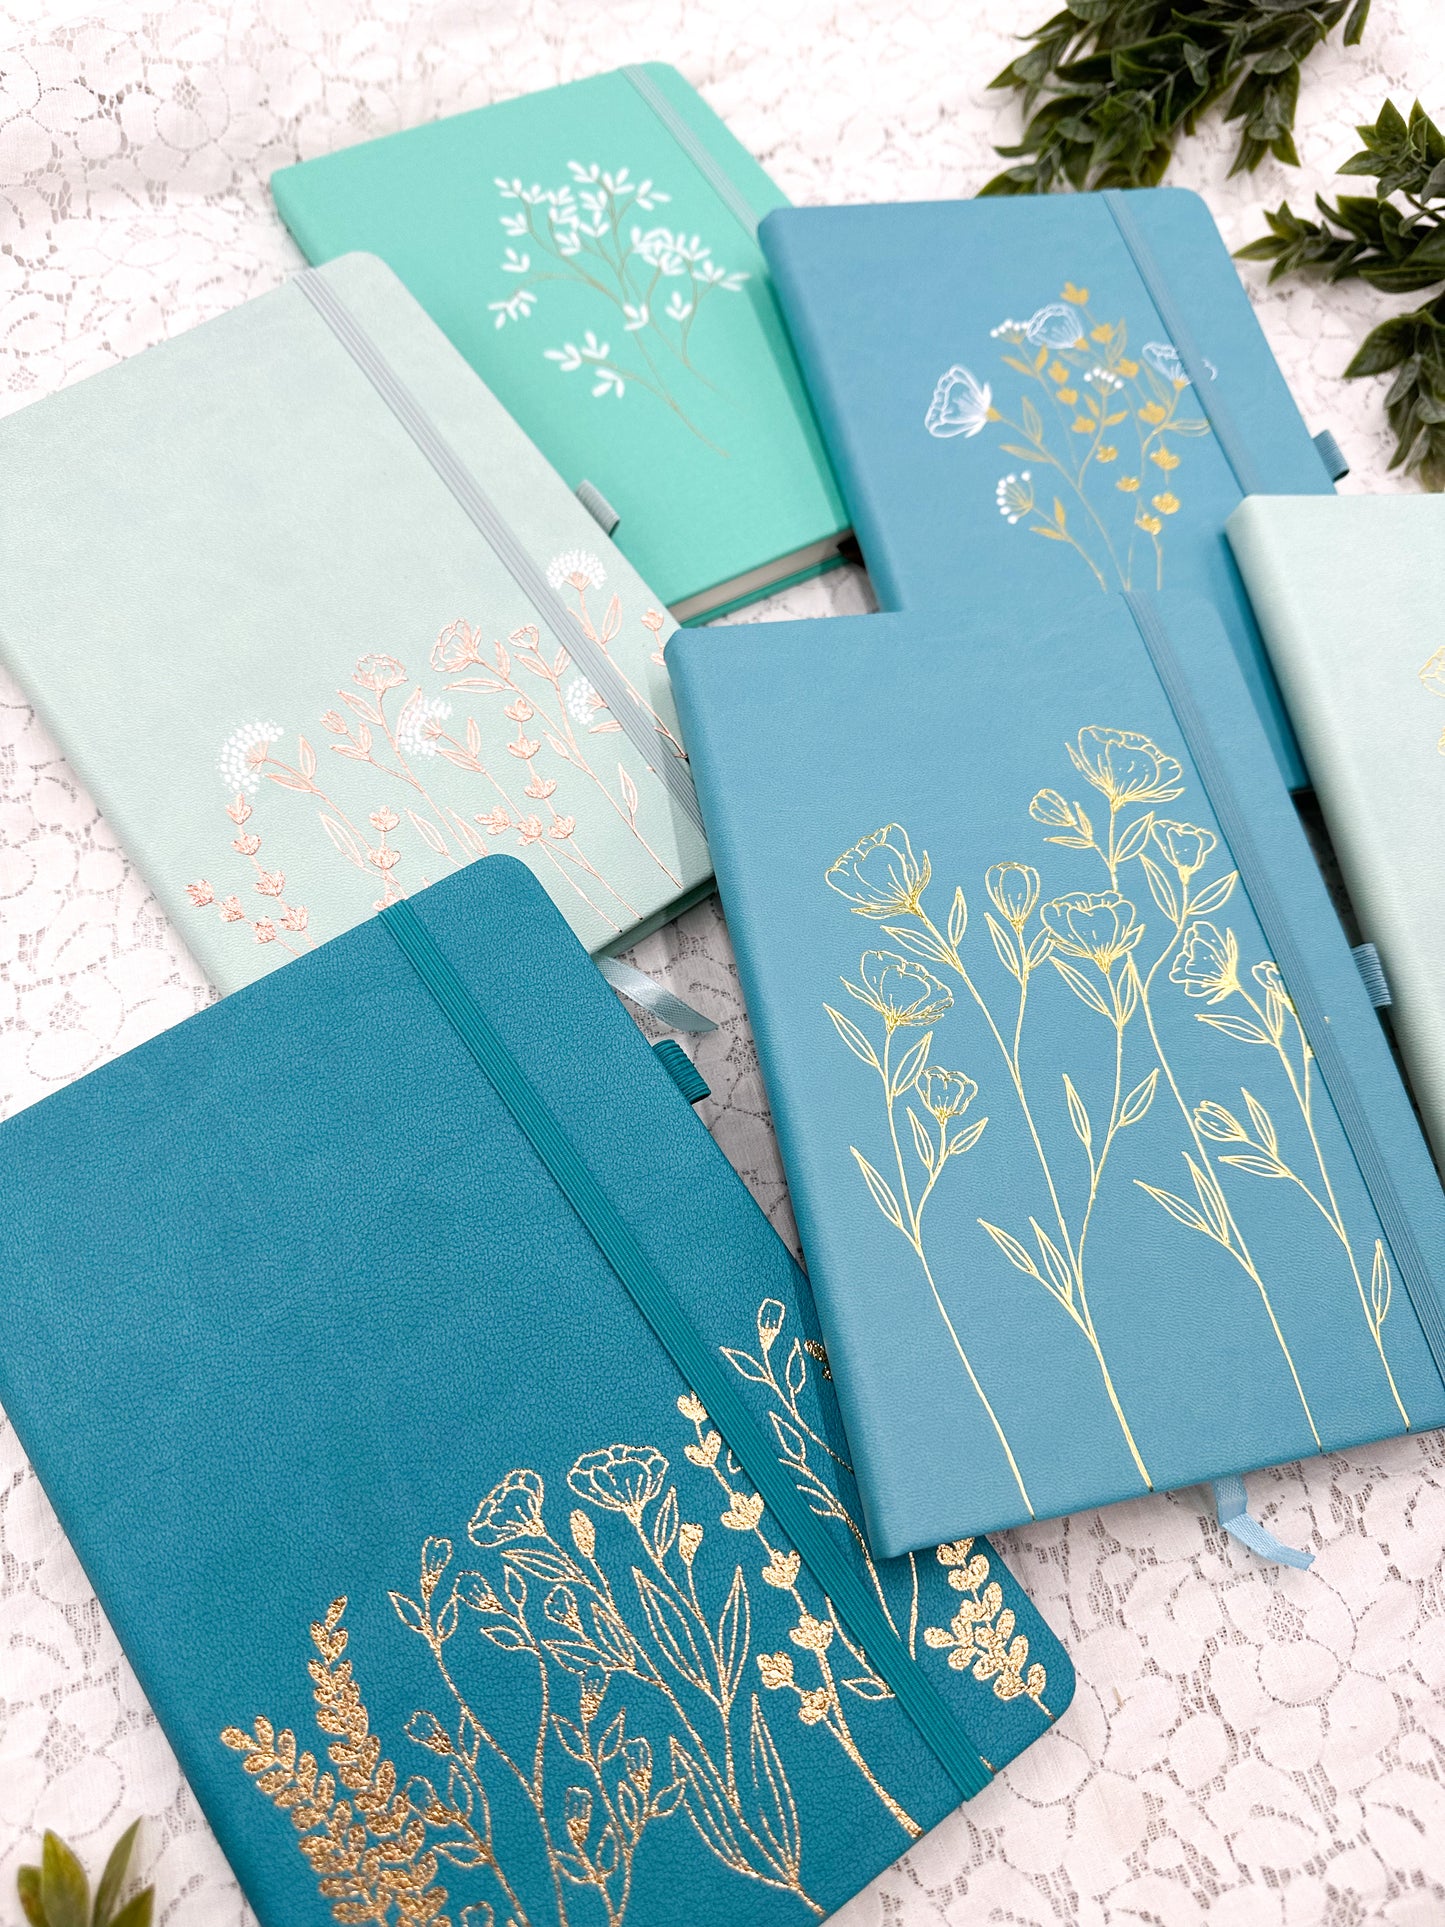 One of a Kind Journal- You Choose Paper